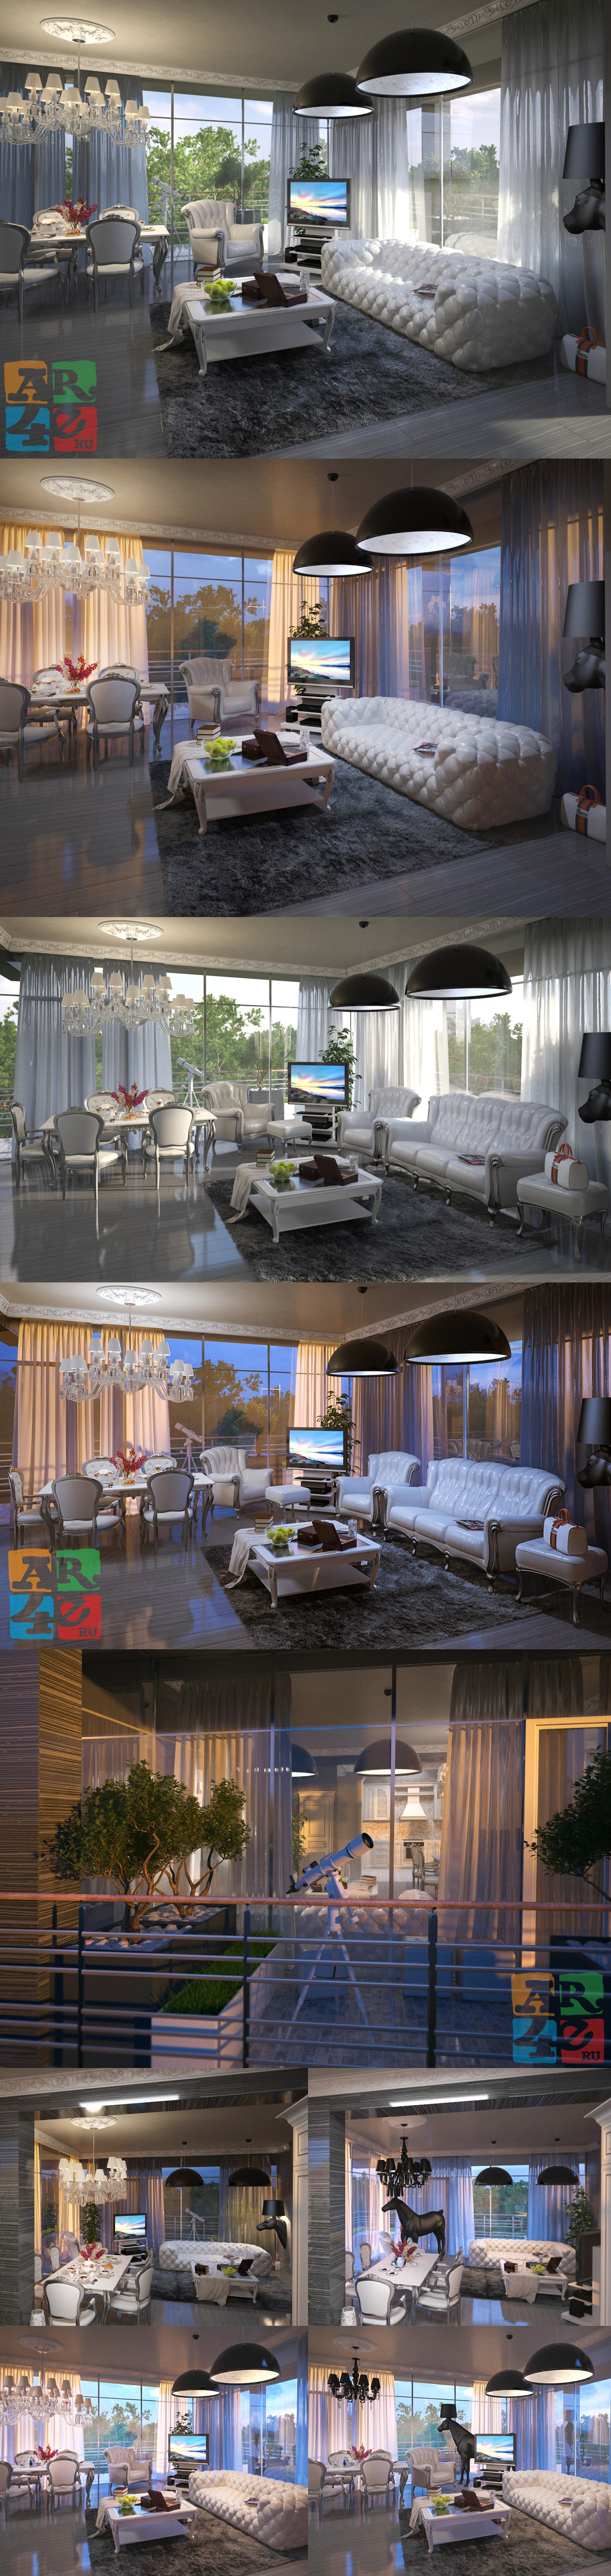 Interior vray penthouse 3D visualization